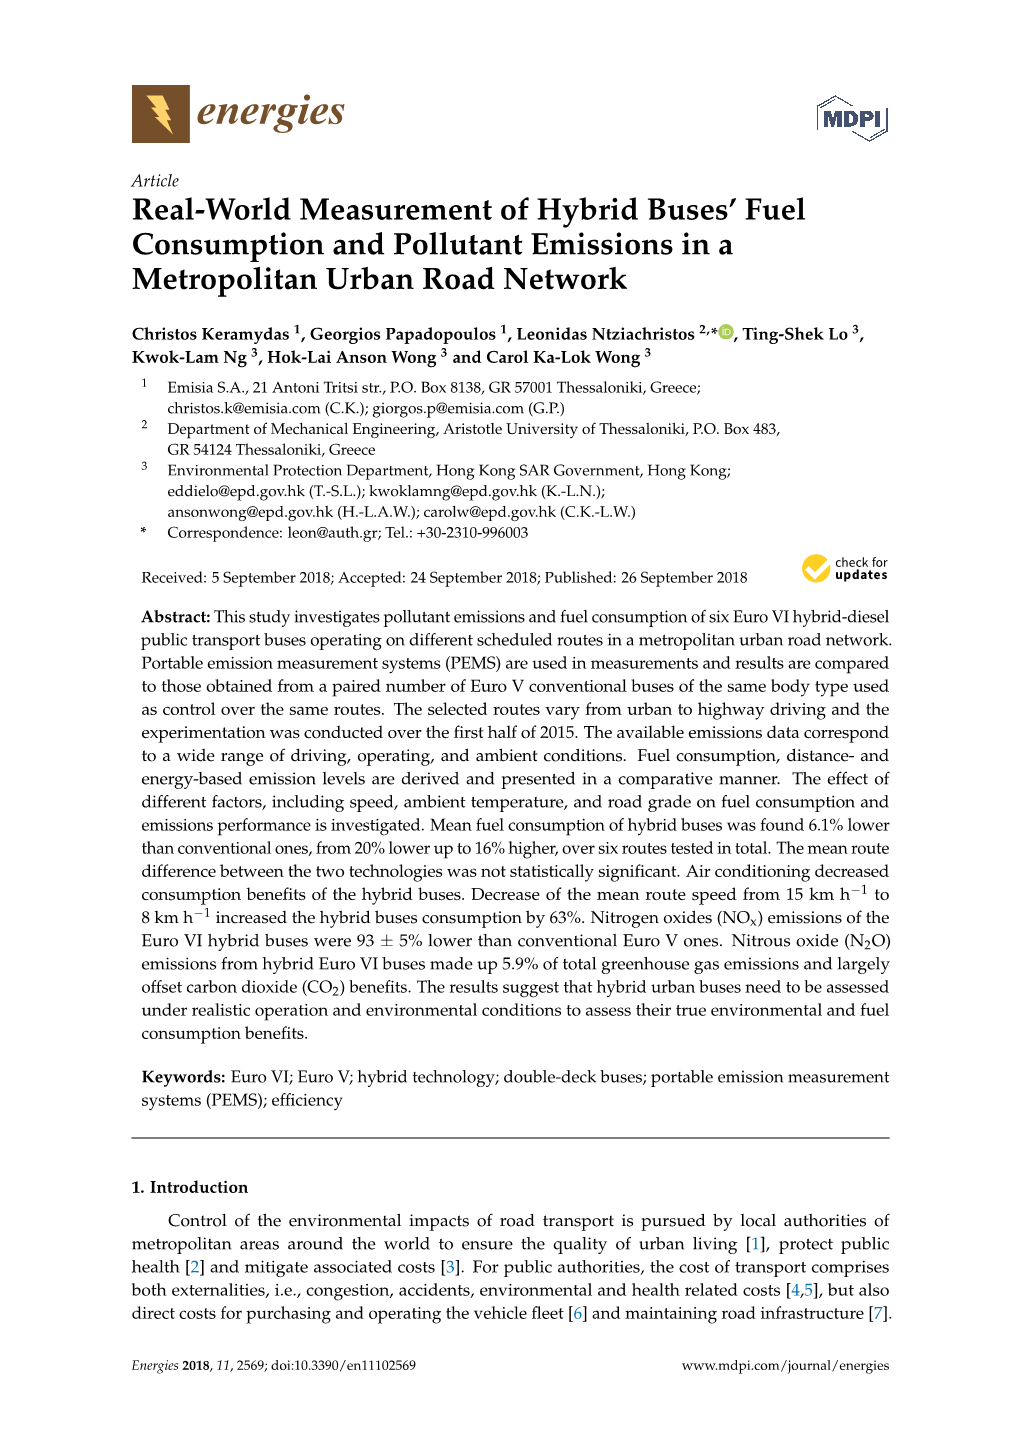 Real-World Measurement of Hybrid Buses' Fuel Consumption And